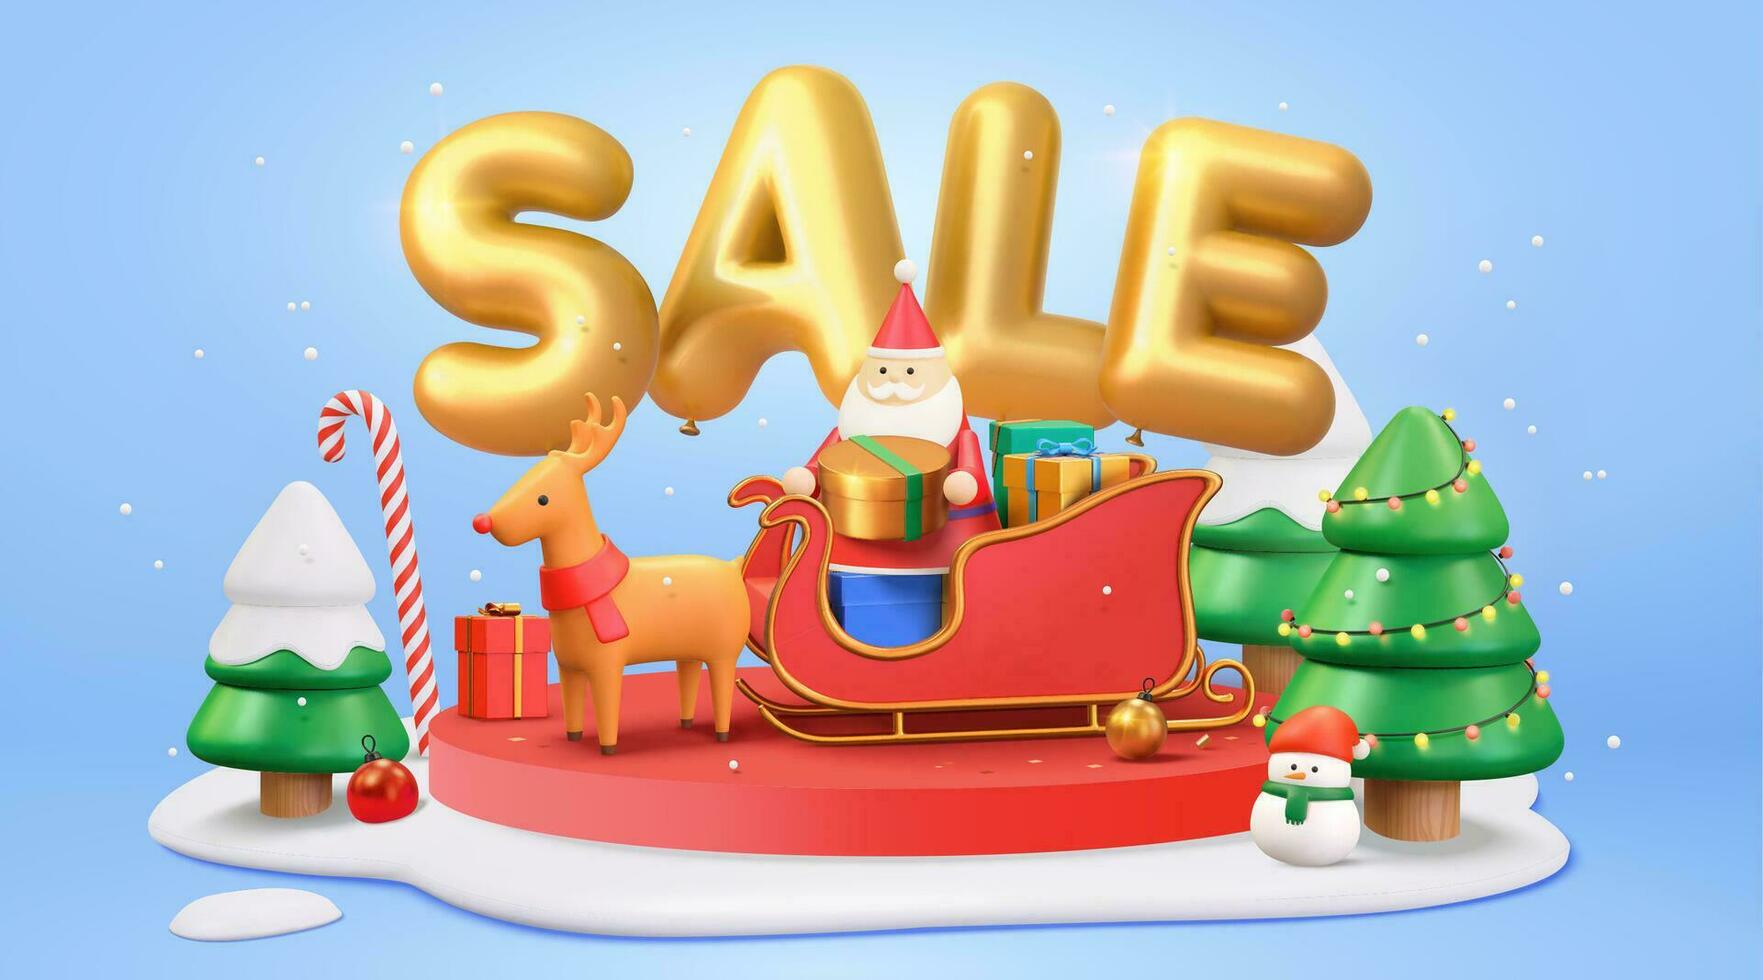 3d Christmas sale banner with Santa Claus sitting on a reindeer sleigh ride and holding gift box. Cute Xmas podium decorated with snow and Christmas trees. vector